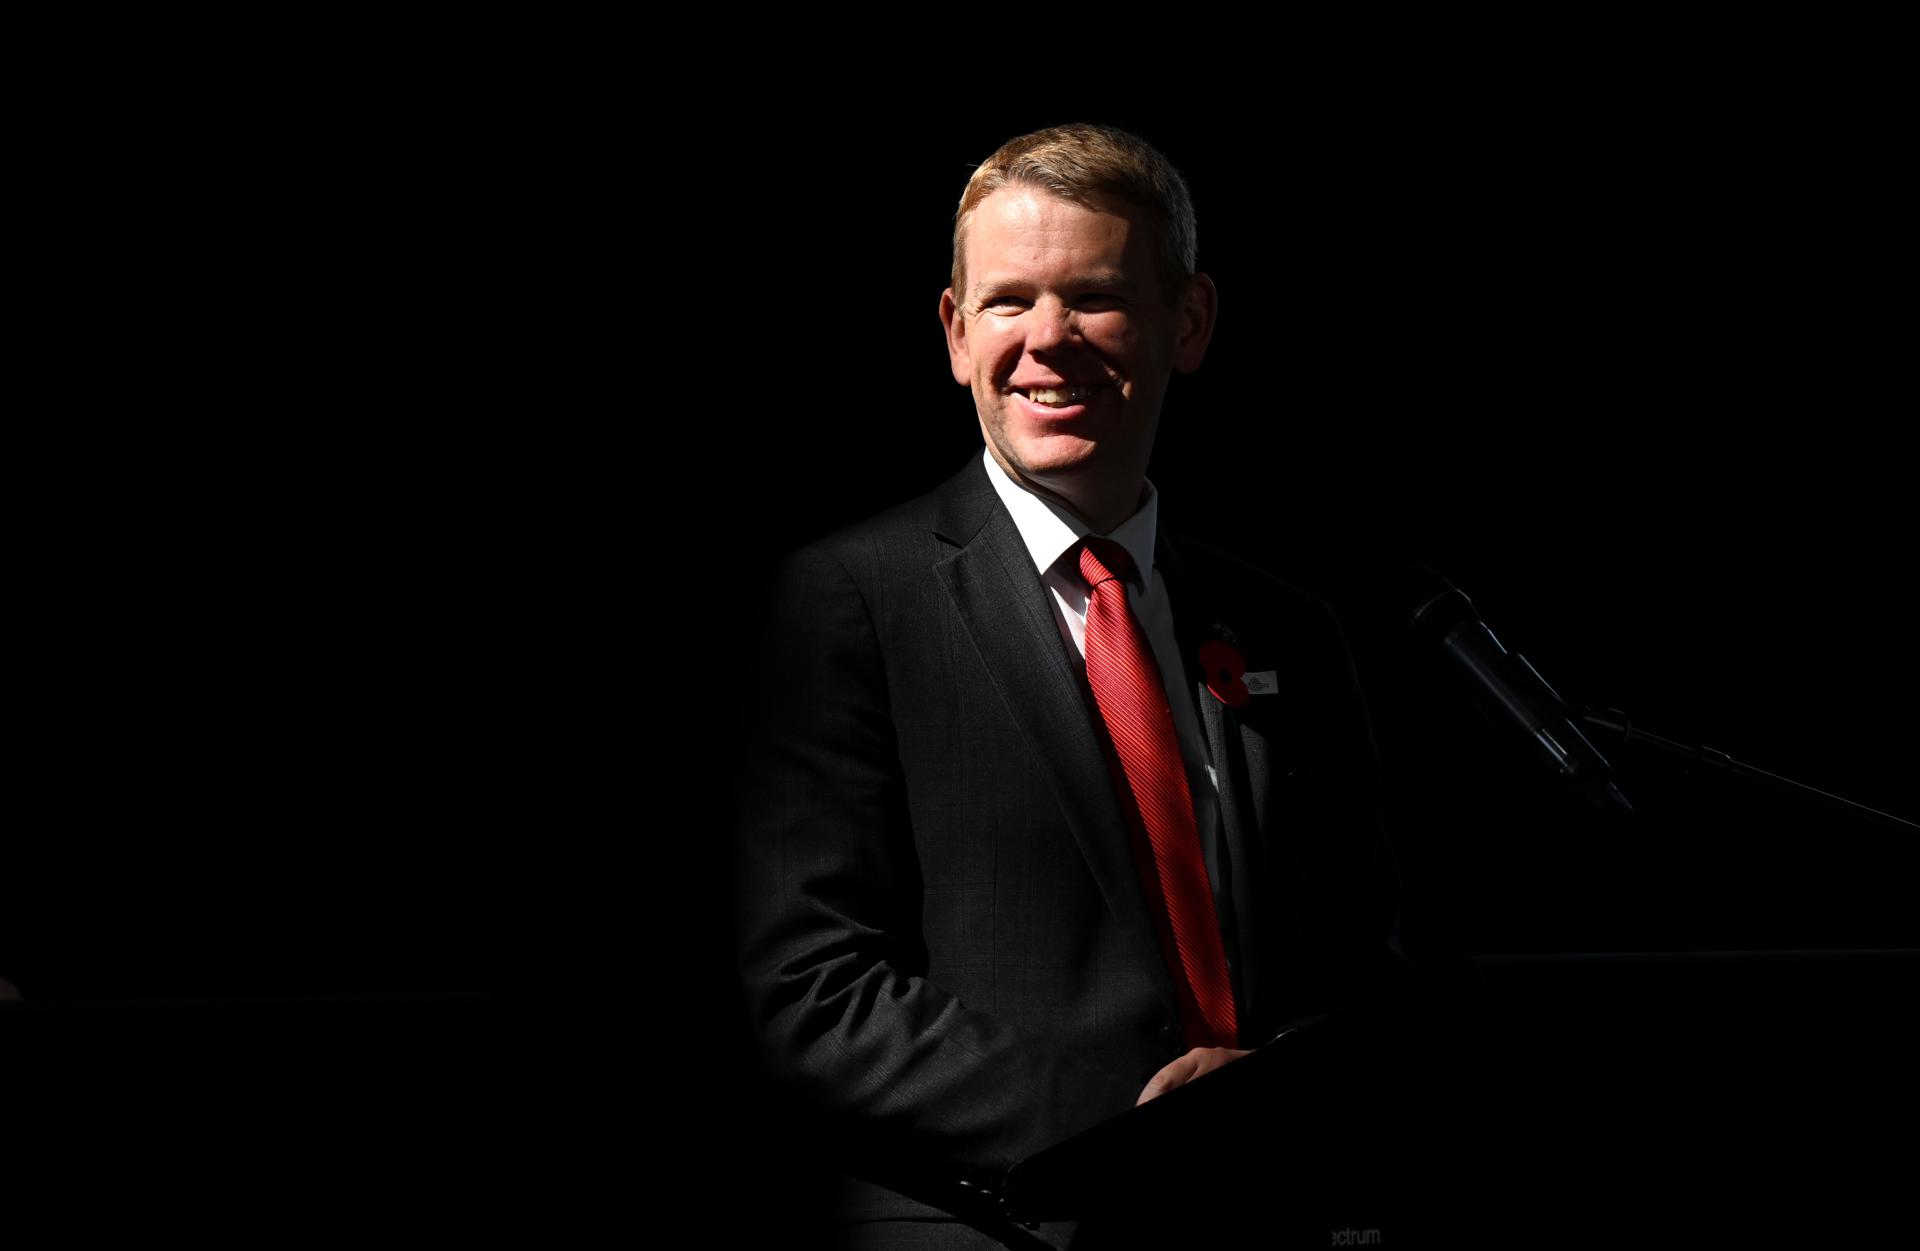 New Zealand Prime Minister Chris Hipkins speaks to the media during a press conference at the South Bank Piazza during a visit to Brisbane, Australia, 23 April 2023. EFE-EPA FILE/DARREN ENGLAND AUSTRALIA AND NEW ZEALAND OUT
